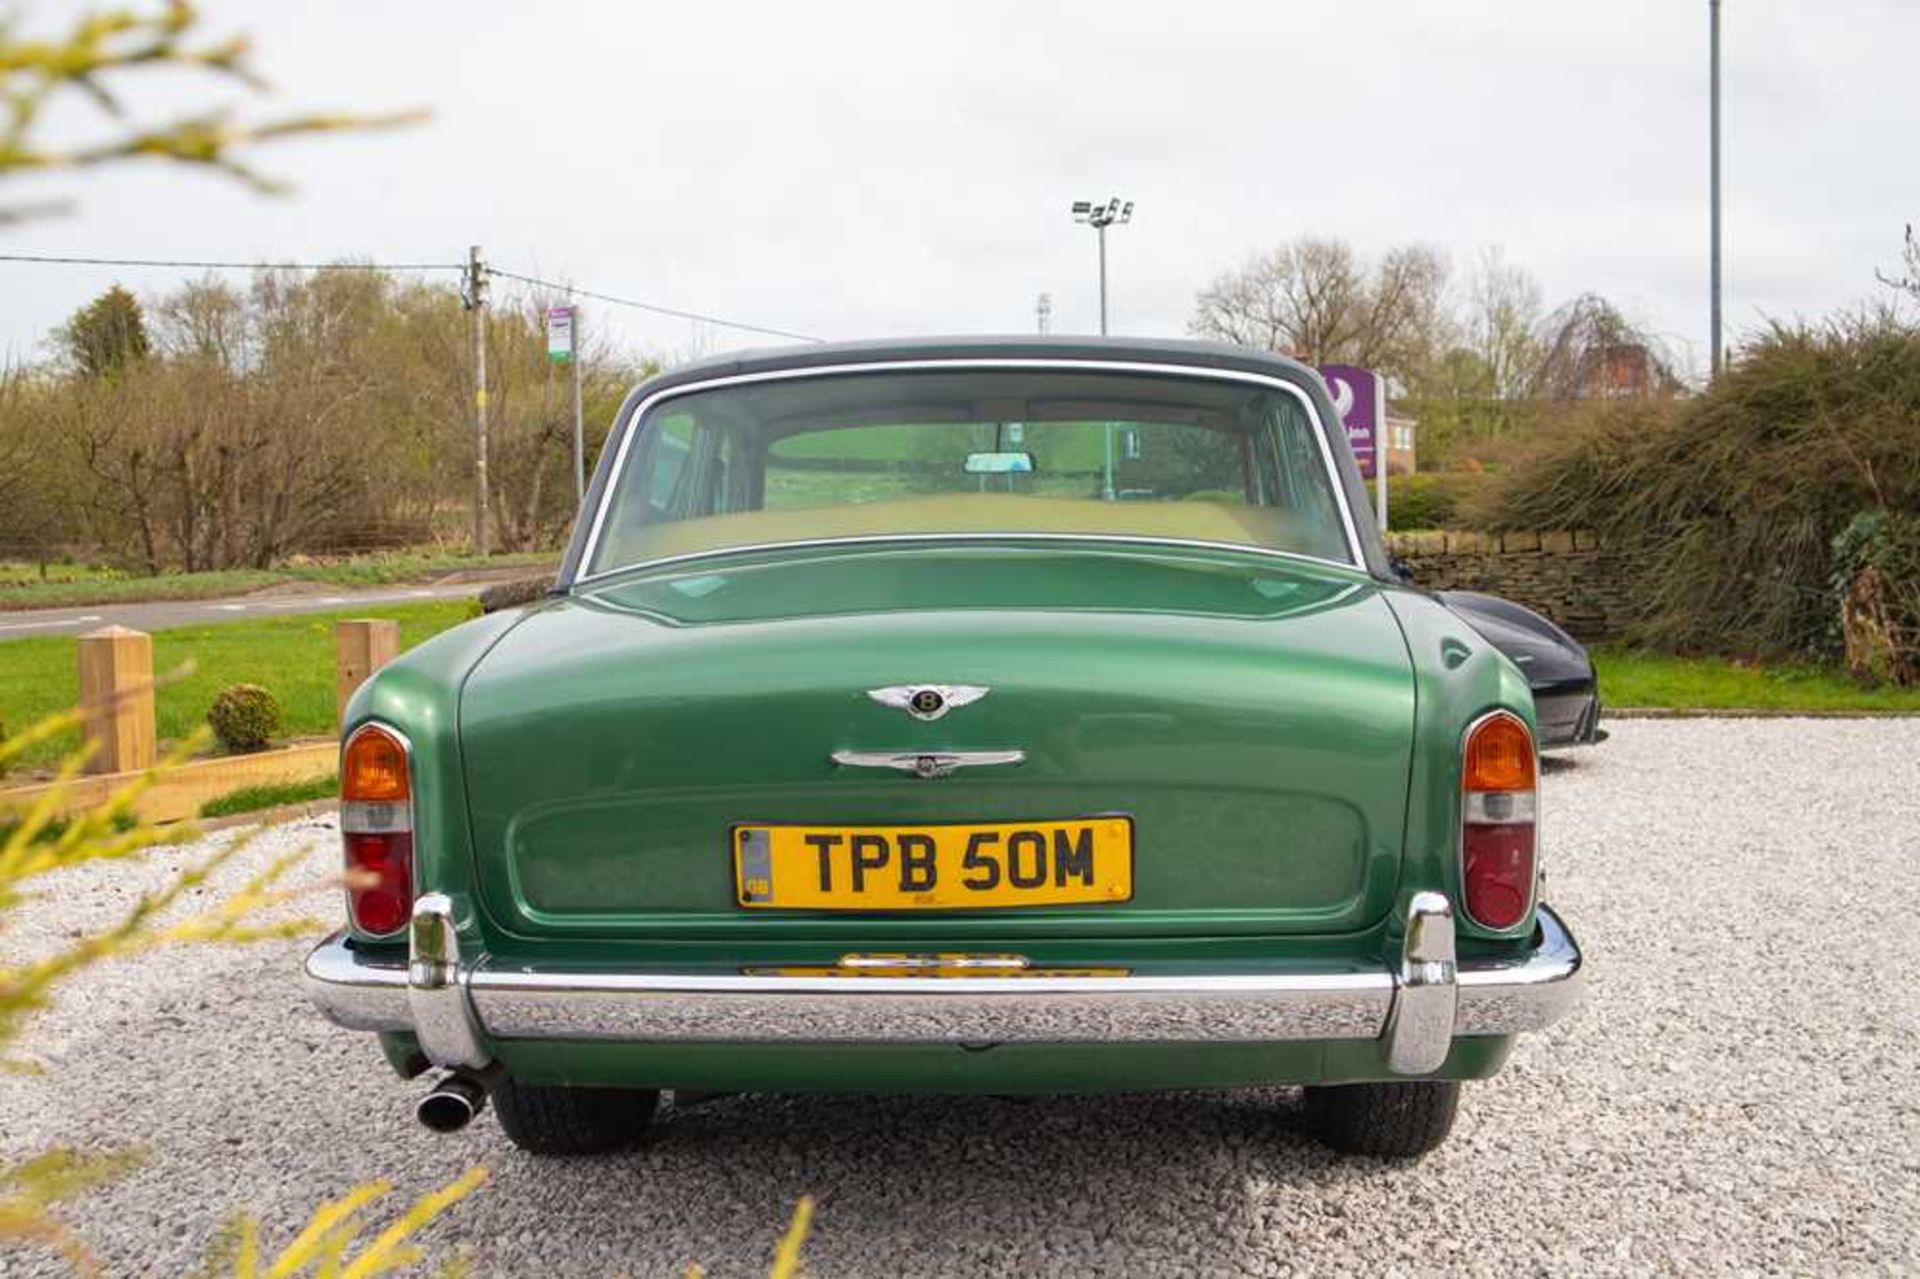 1973 Bentley T-Series Saloon Formerly part of the Dr James Hull and Jaguar Land Rover collections - Image 12 of 22